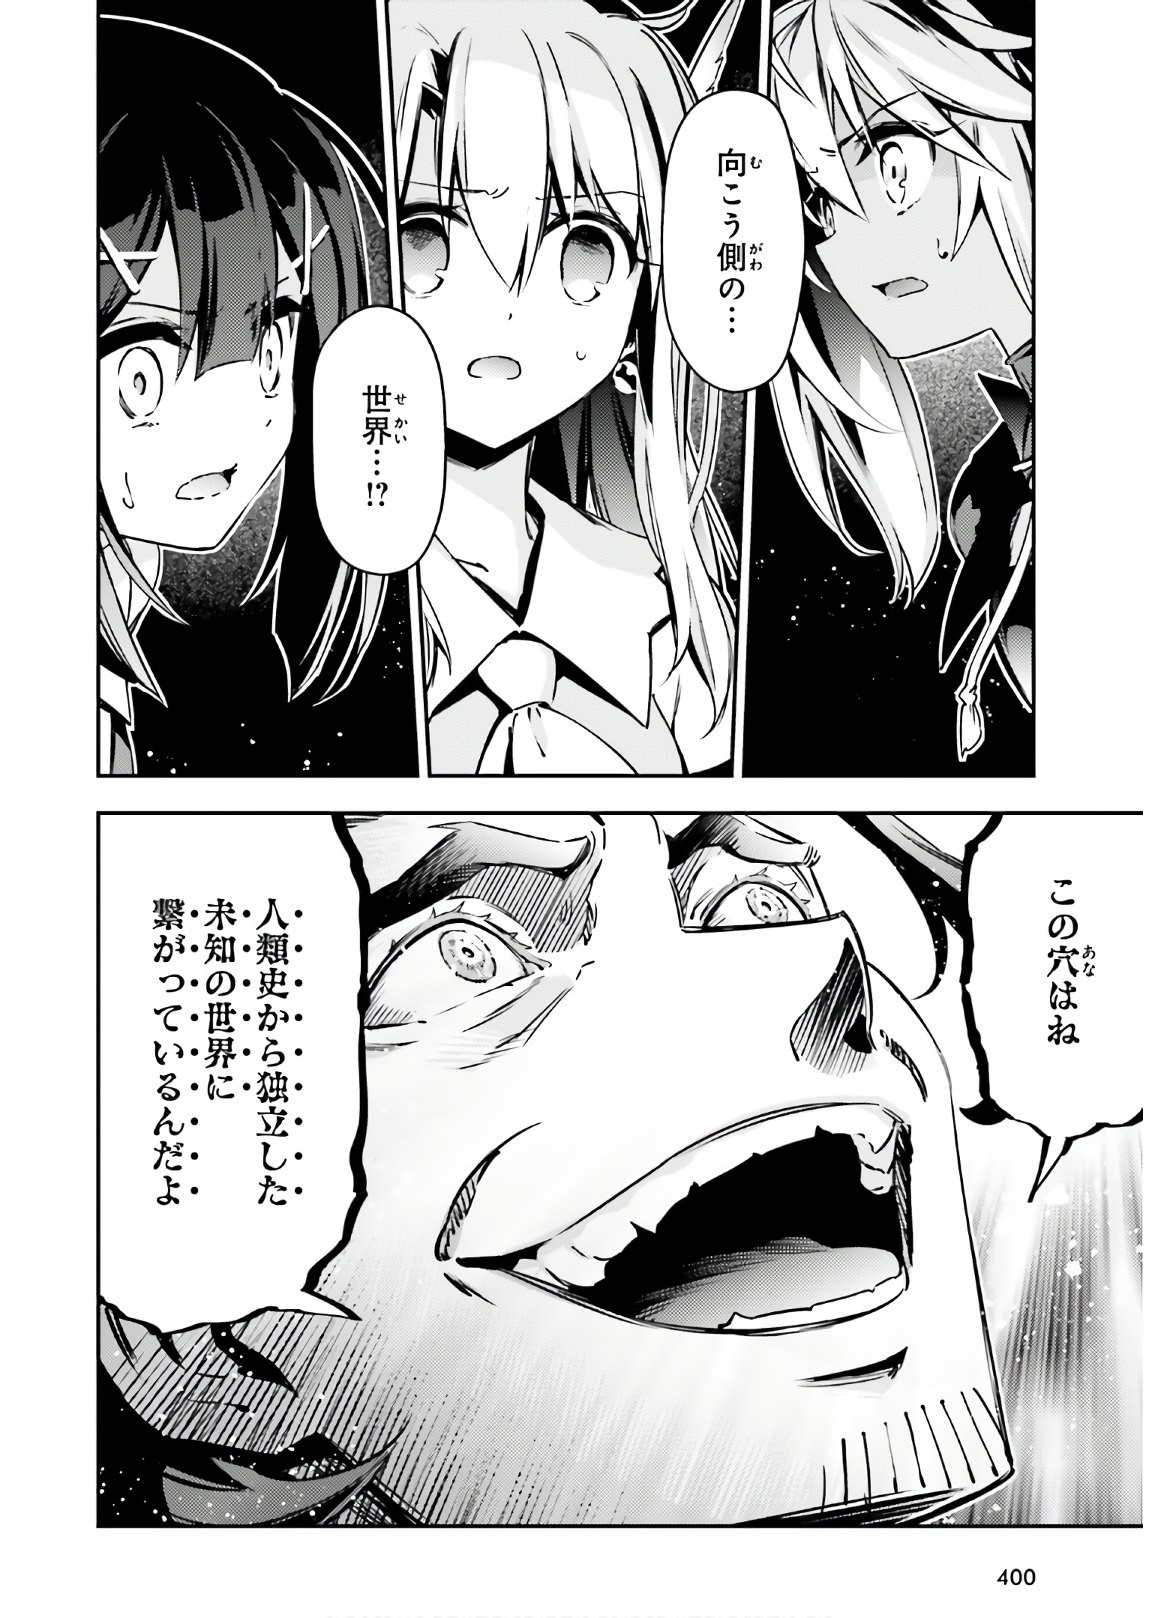 Fate/Kaleid Liner Prisma Illya Drei! - Chapter 58-1 - Page 6